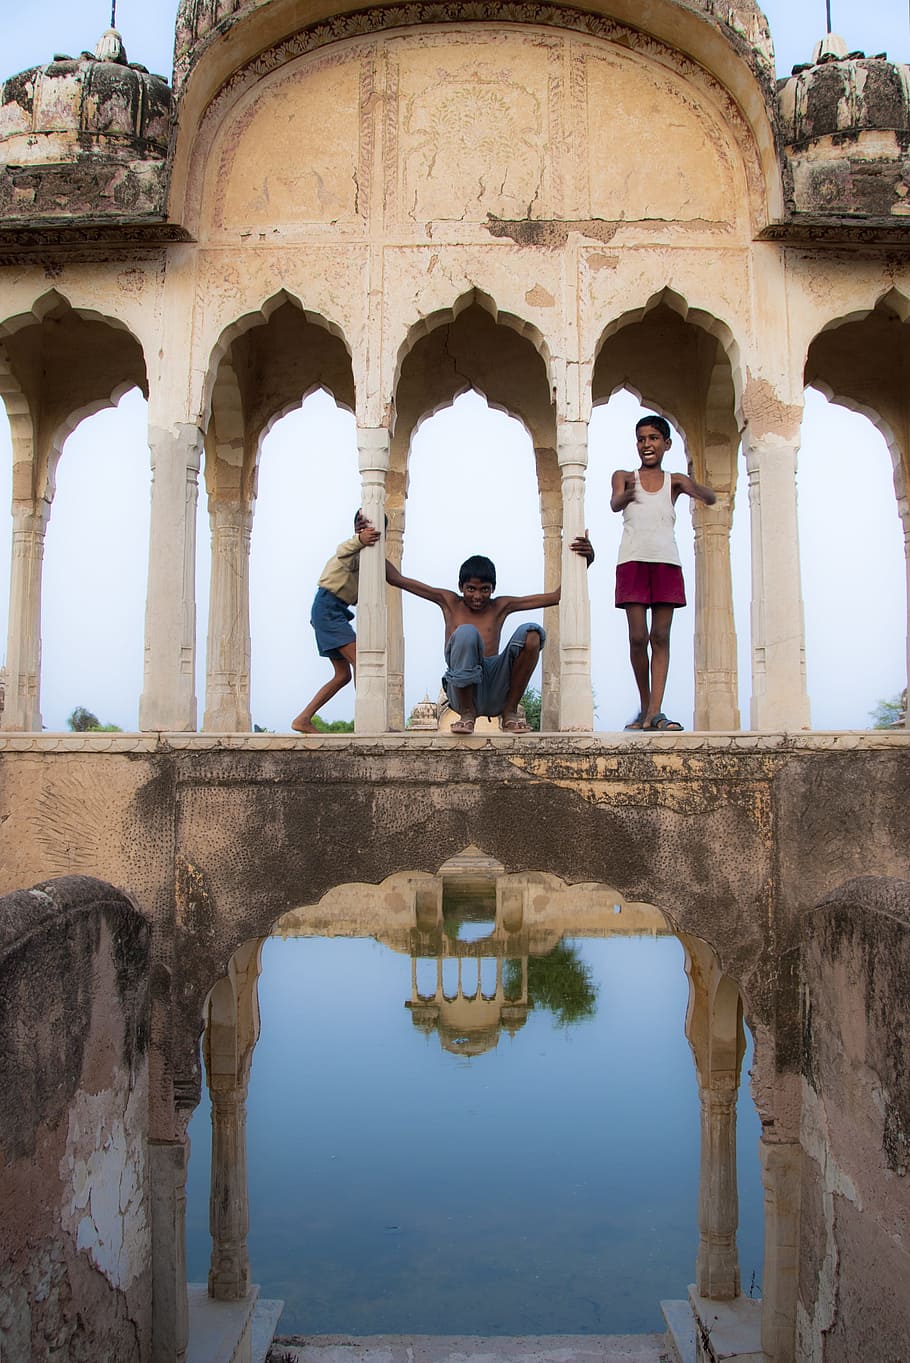 India, Asia, Travel, Rajasthan, Children, playing, remains, outdoors, arch, architecture